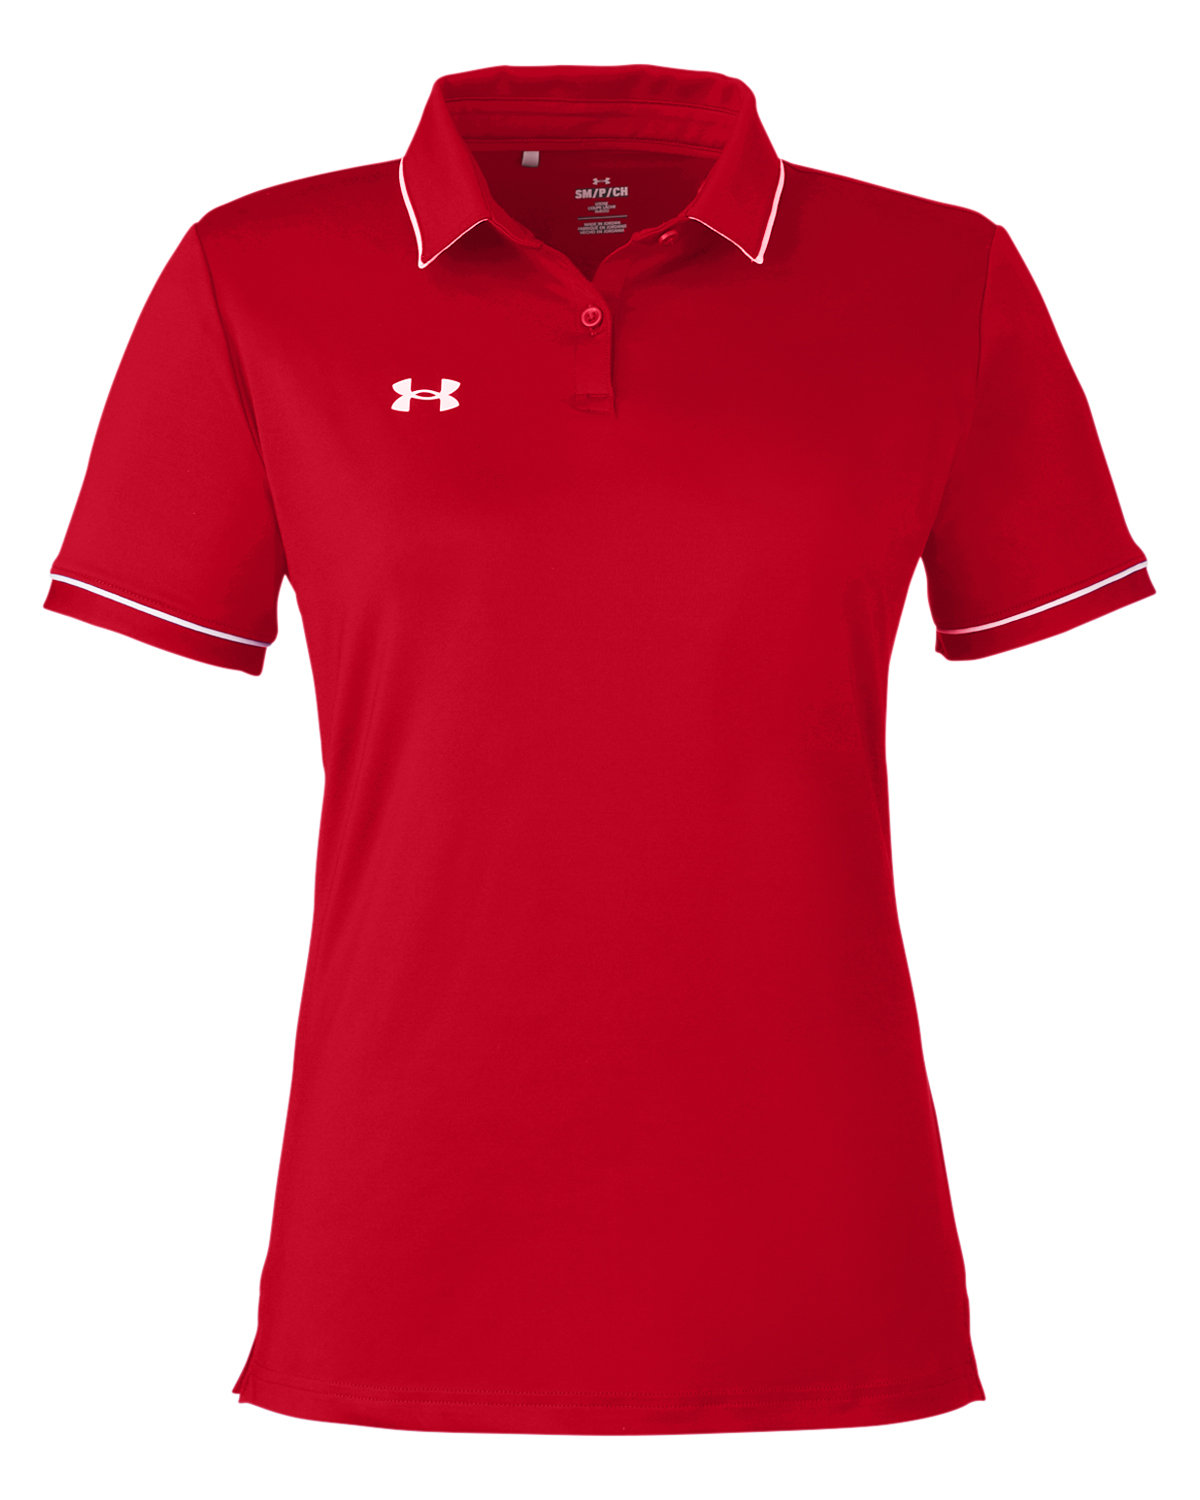 Under Armour 1376905 - Ladies' Tipped Teams Performance Polo